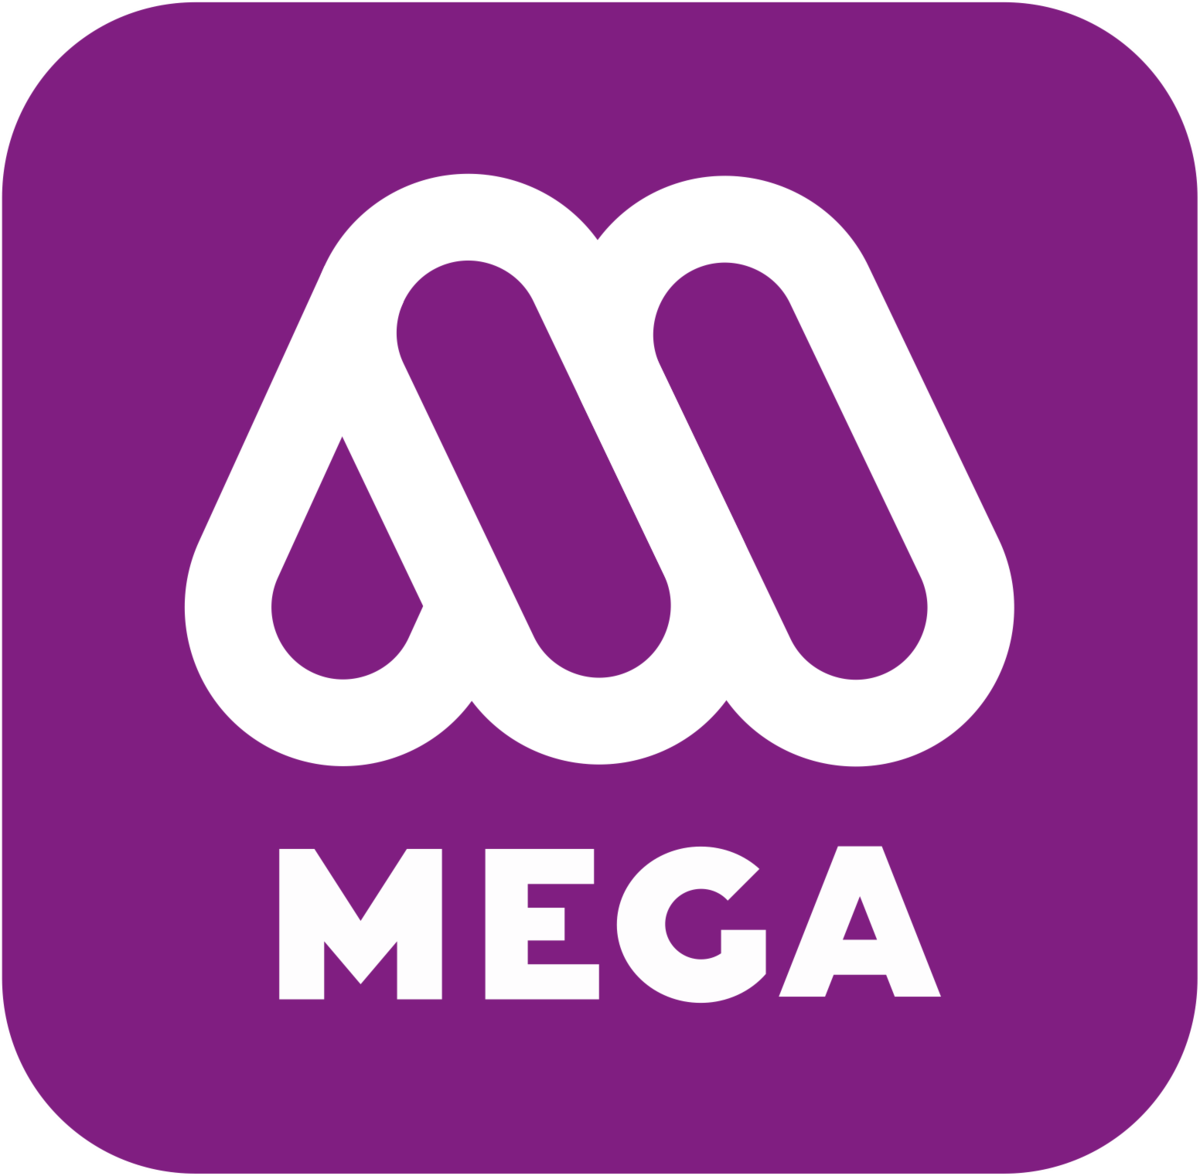 Canal TVR Logo - Mega (Chilean TV channel)